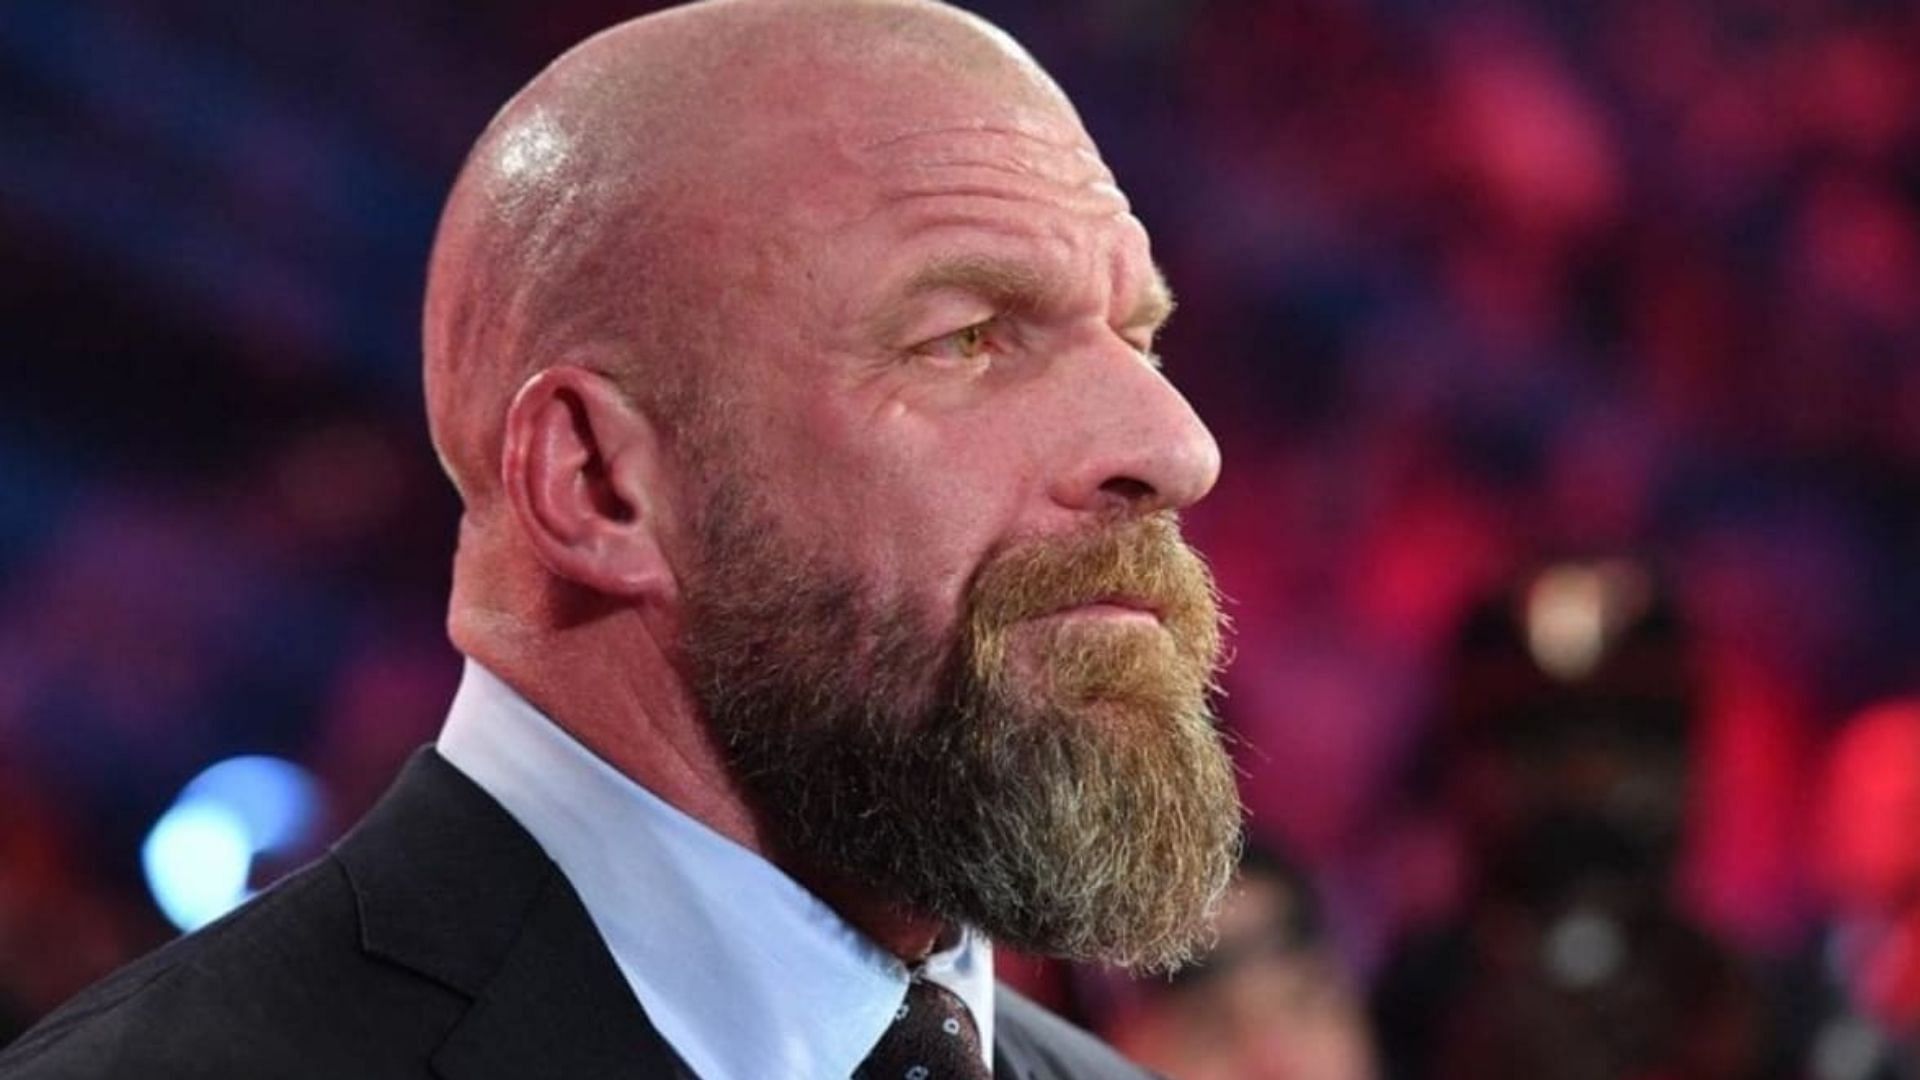 Triple H has taken over creative for WWE